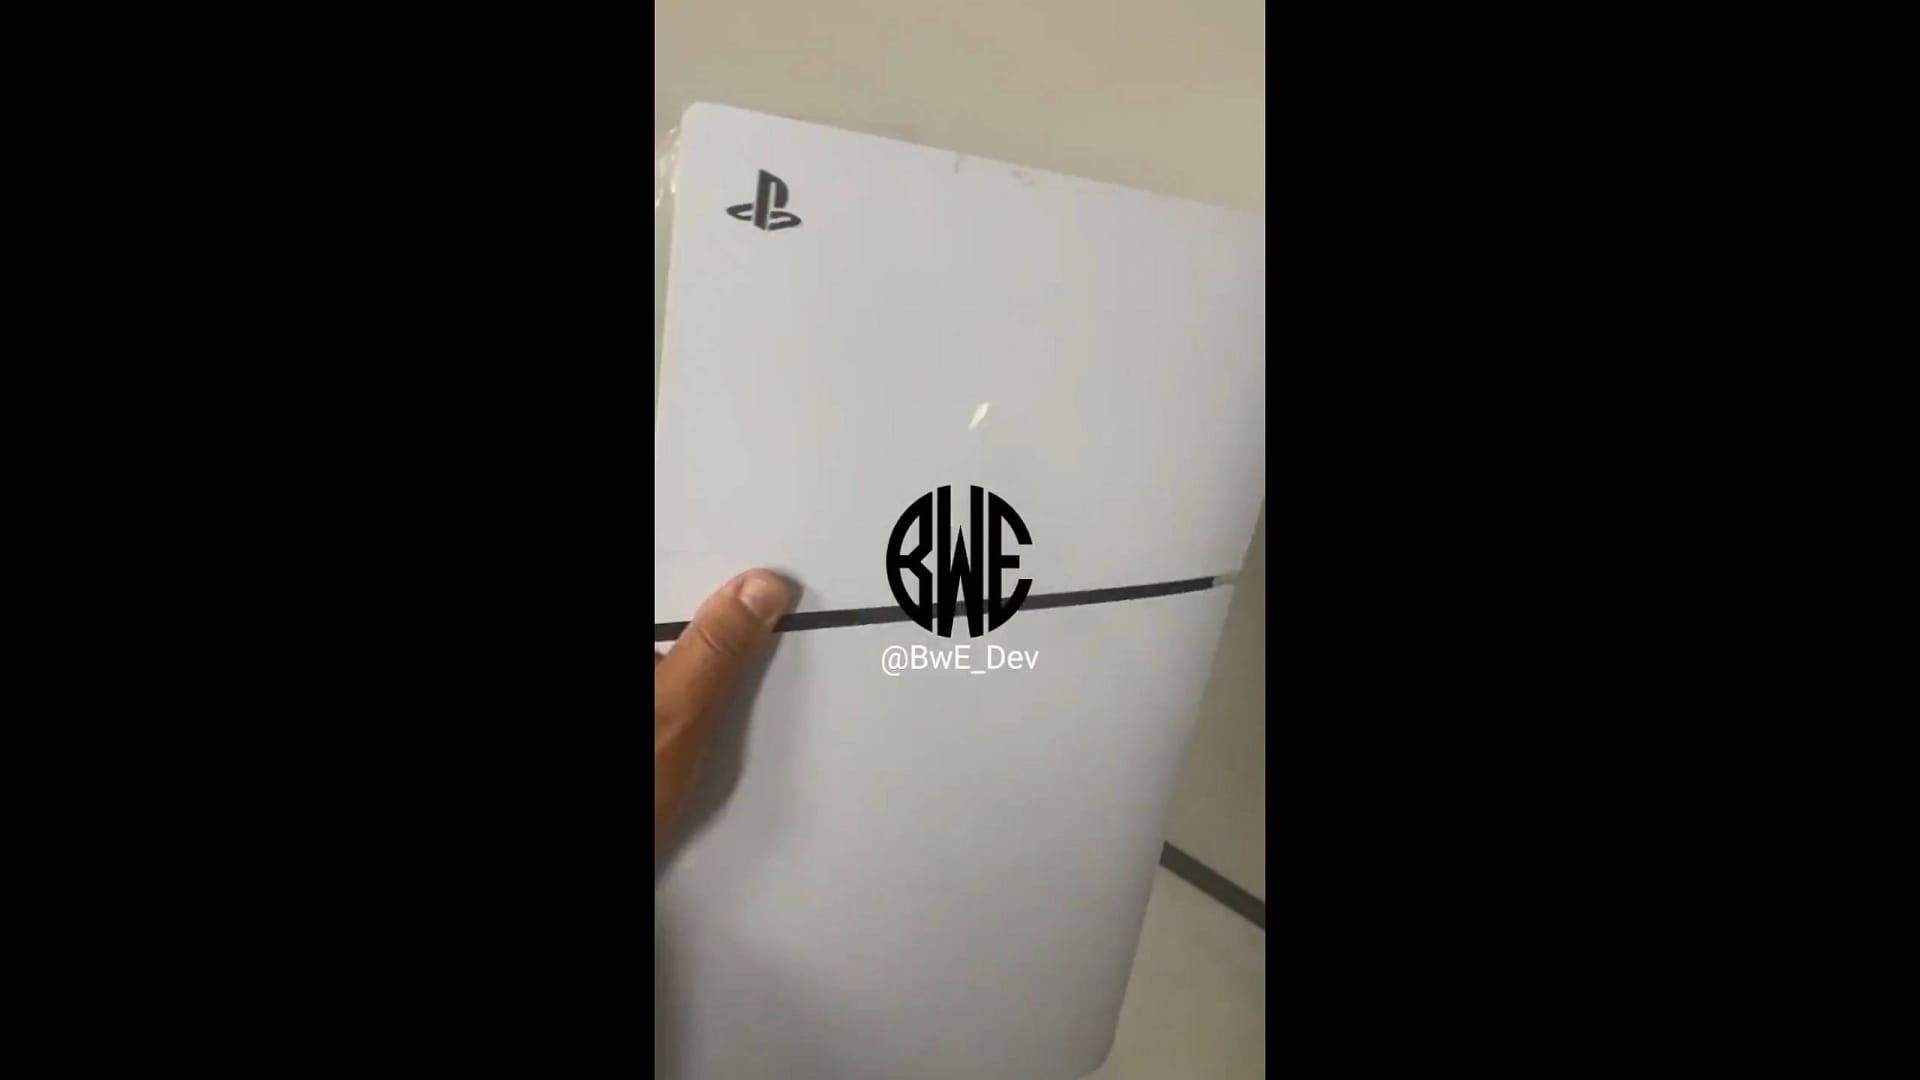 Alleged New PS5 Model Design Surfaces in New Video